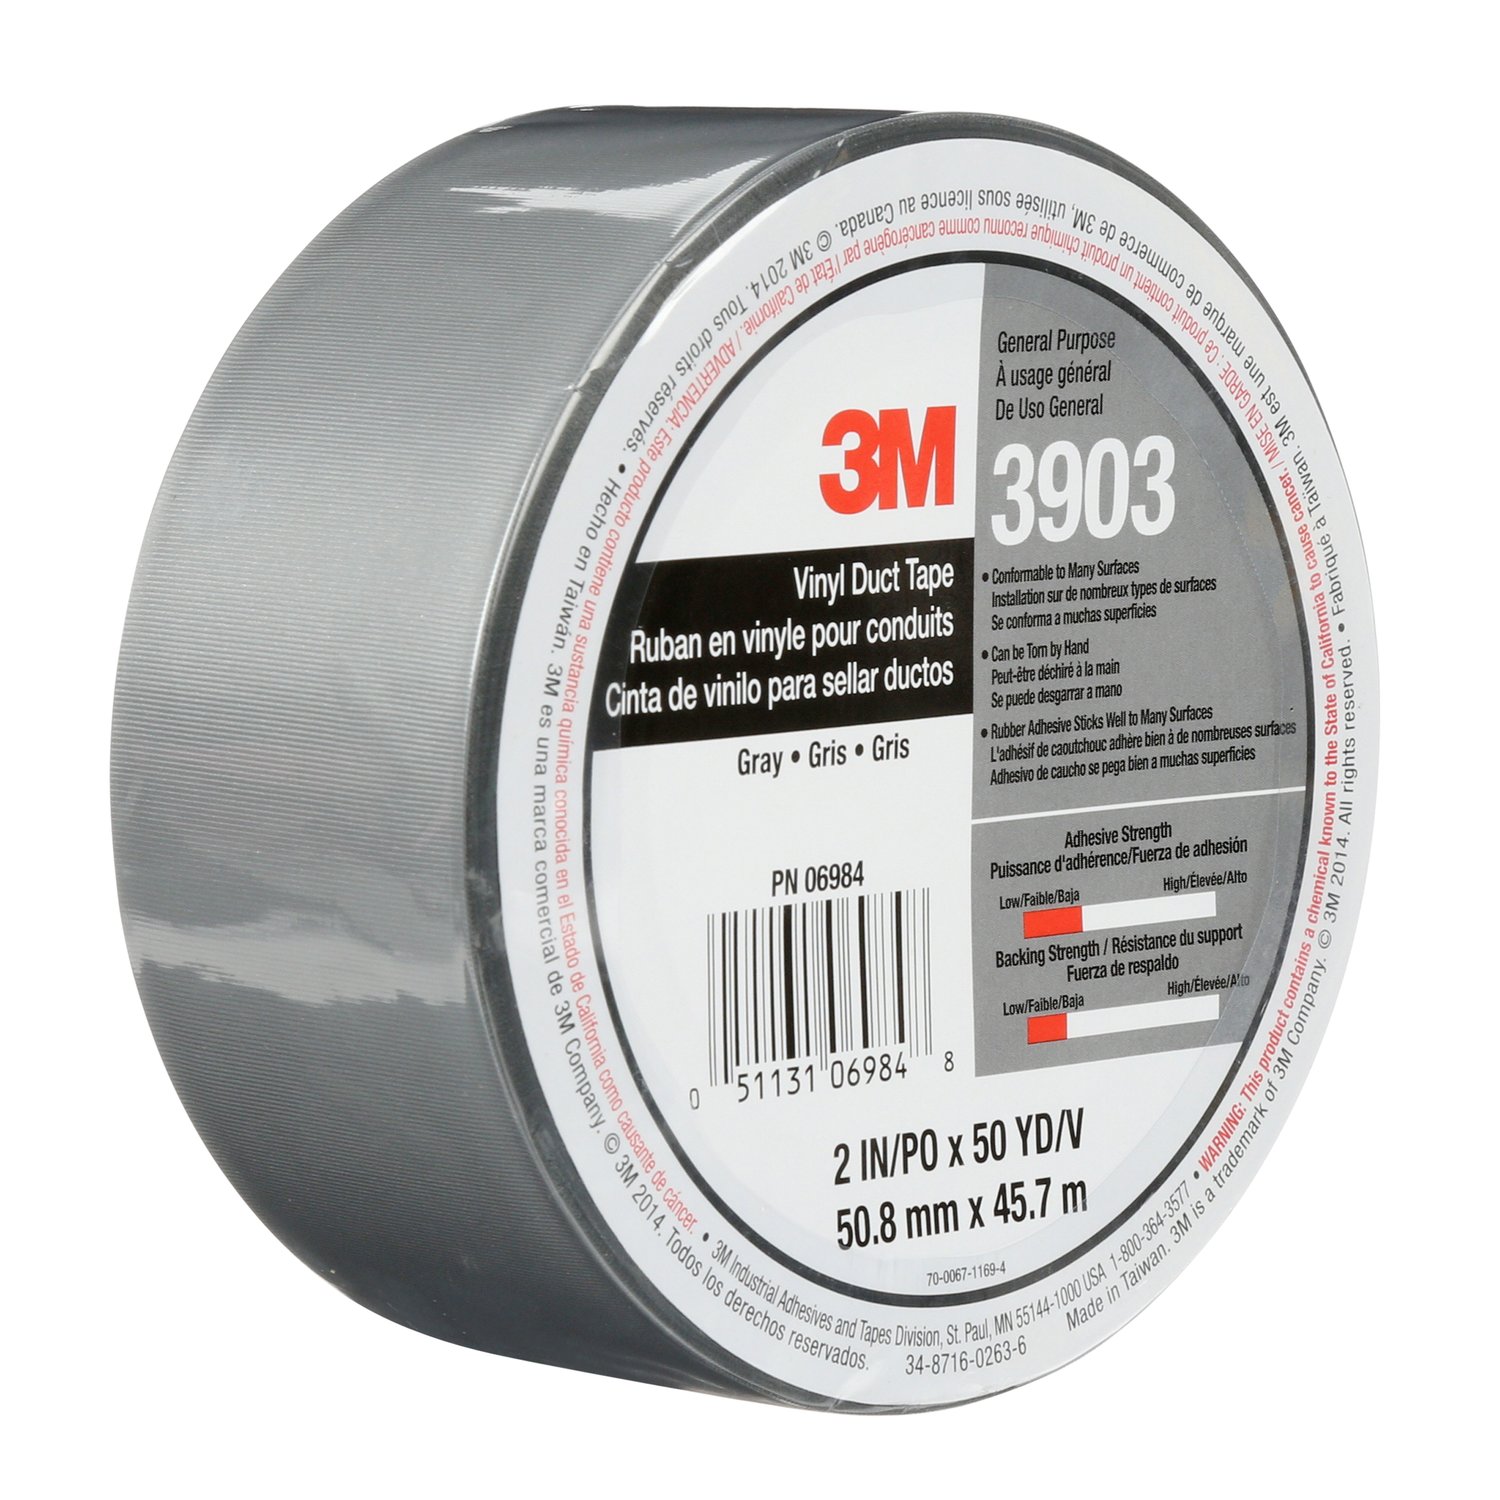 7100145925 - 3M Vinyl Duct Tape 3903, Gray, 2 in x 50 yd 6.5 mil, 24/Case,
Individually Wrapped Conveniently Packaged